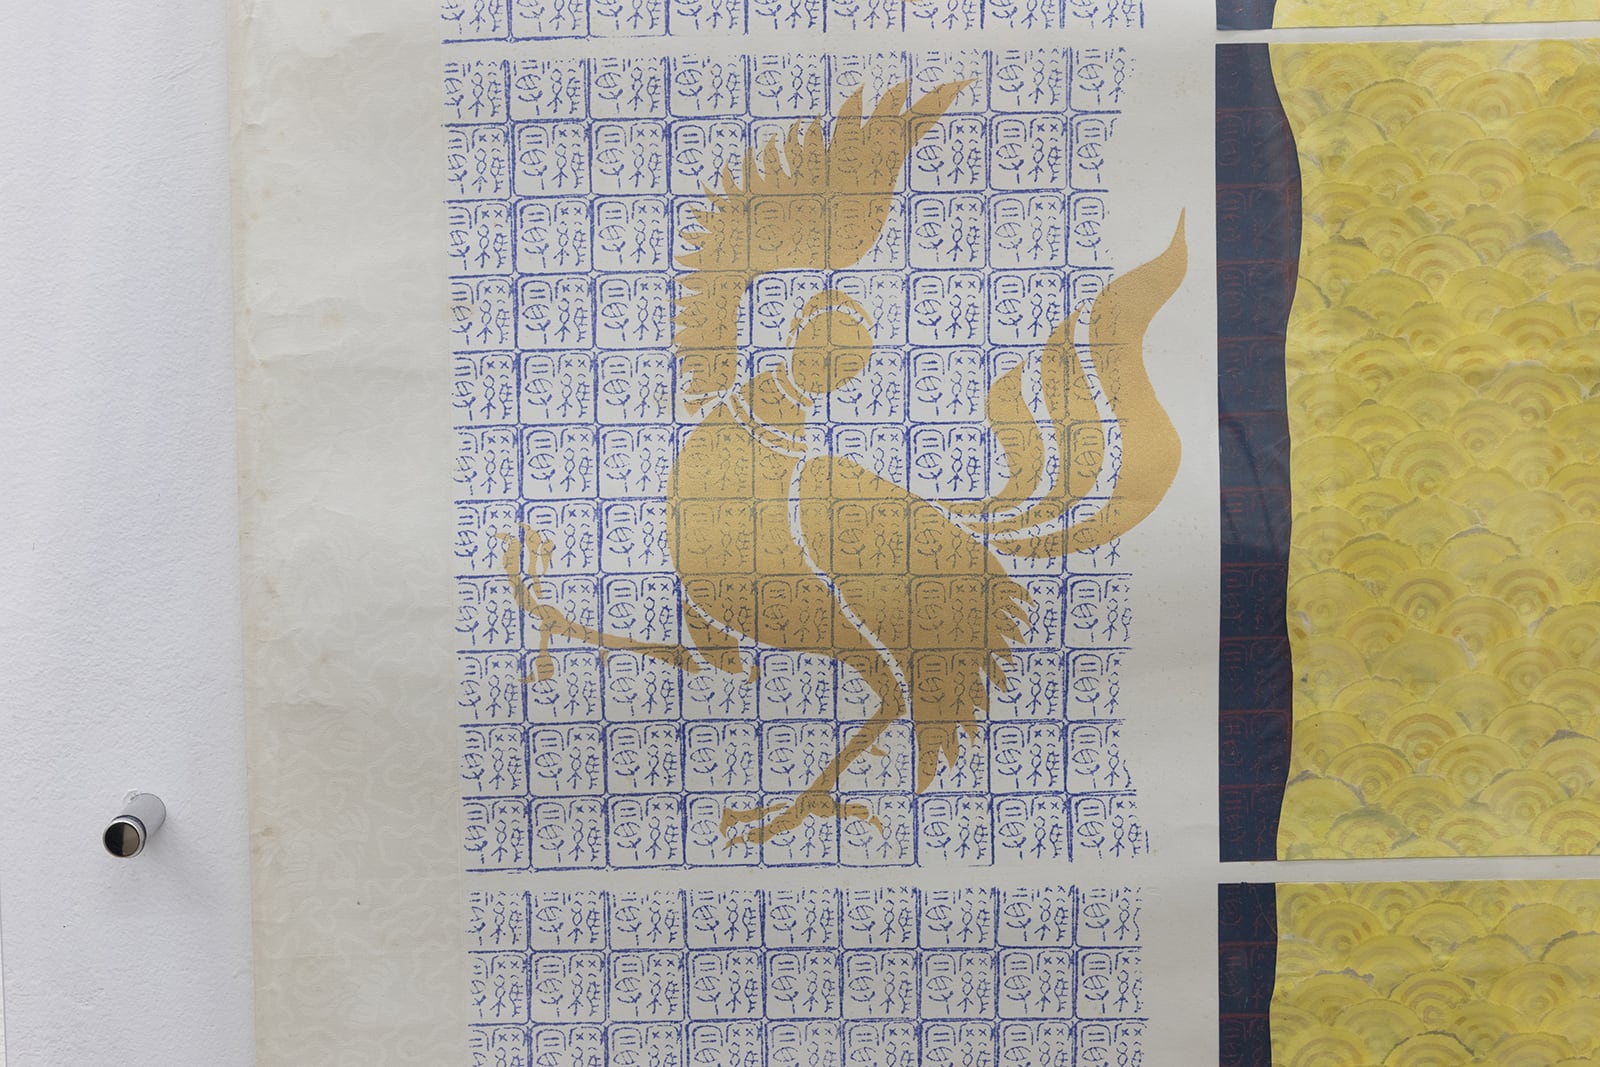 Roman Minaev, DREAMER I (detail), 1999, chinese scroll, collage, name seal, stencil, watercolor, 260 x 84 cm